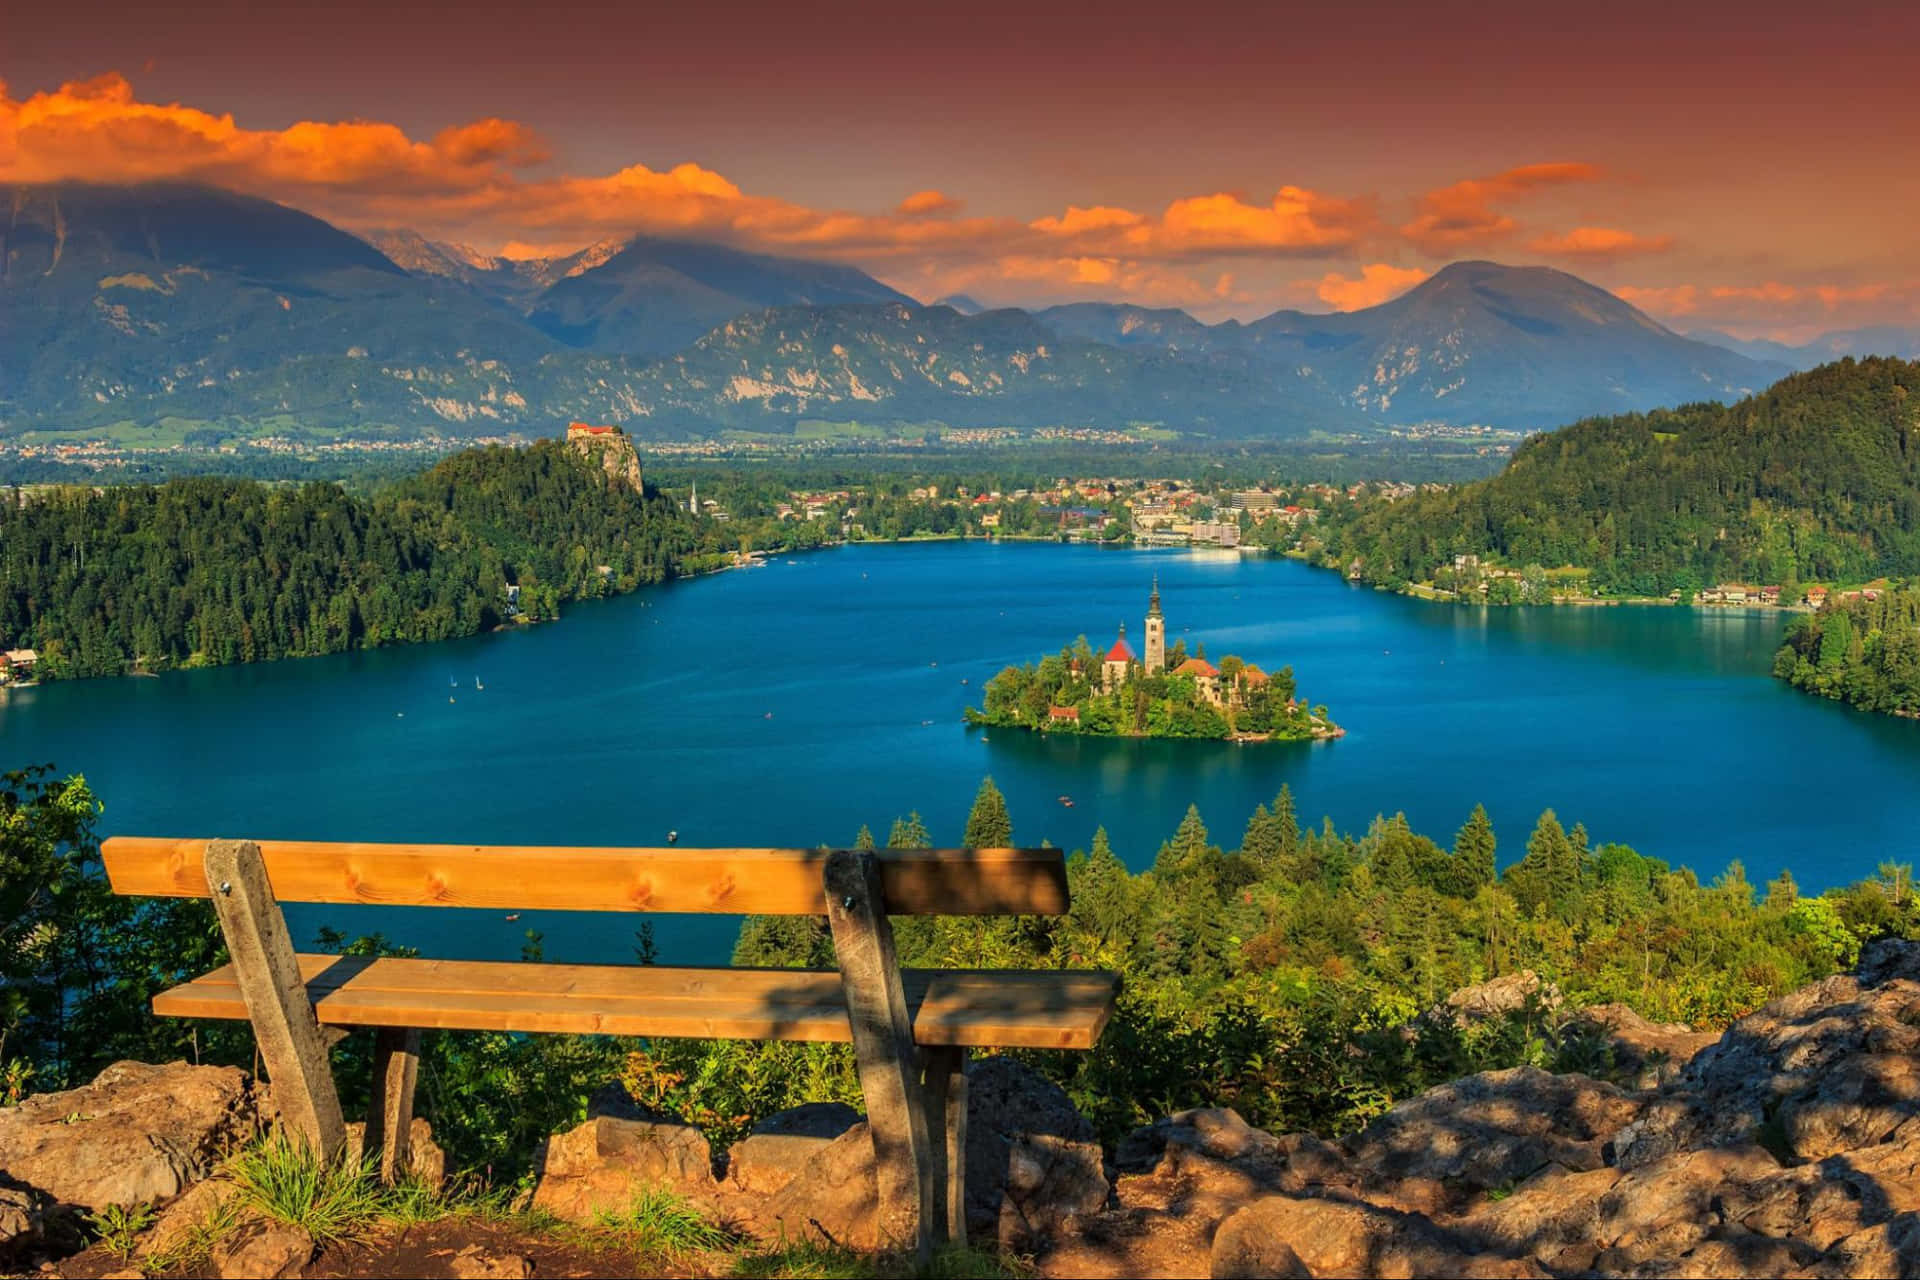 Sunset At Lake Bled Seen From The Mountain Peak Wallpaper